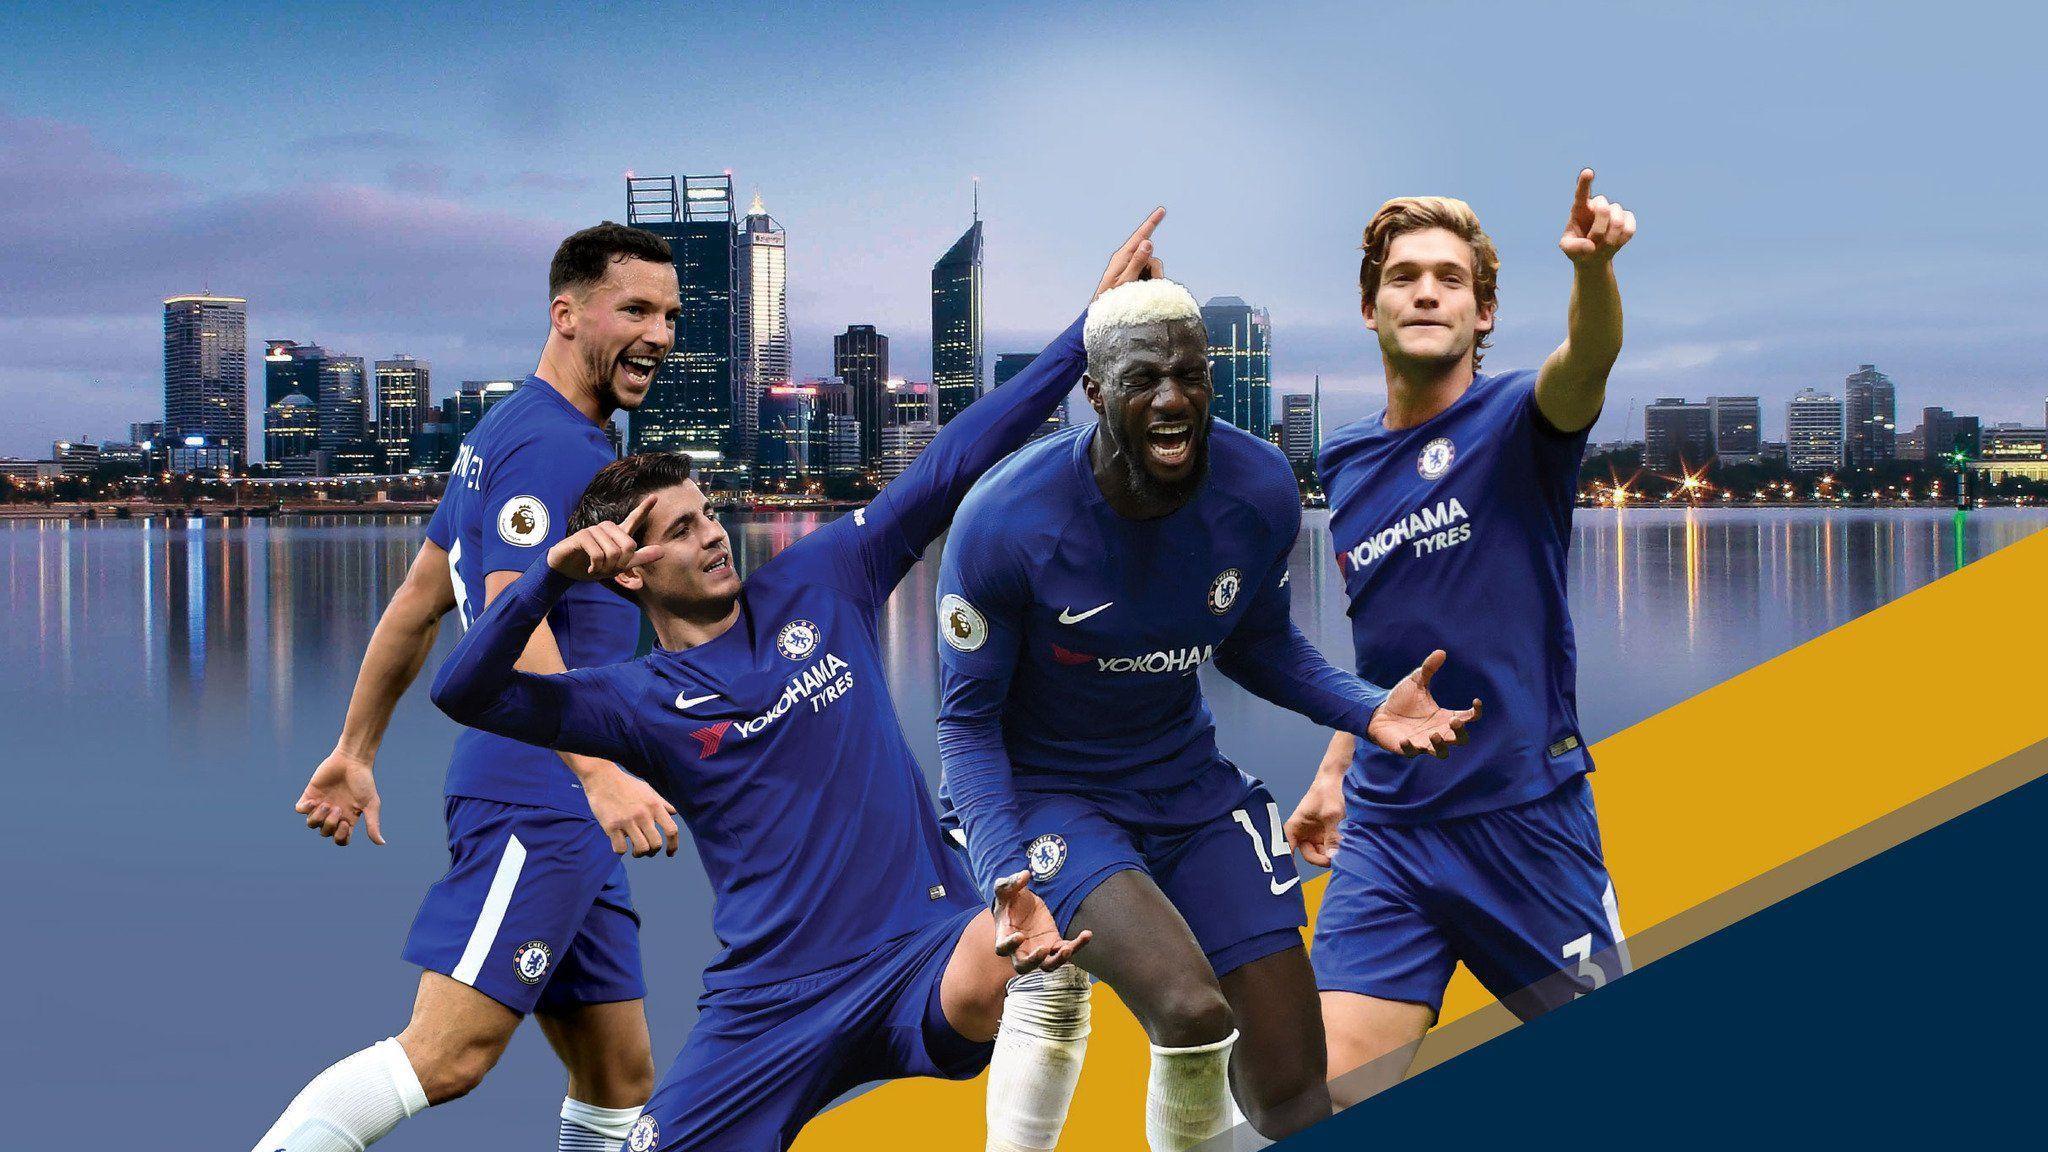 Chelsea F.C. Latest 2018 Wallpapers - Wallpaper Cave